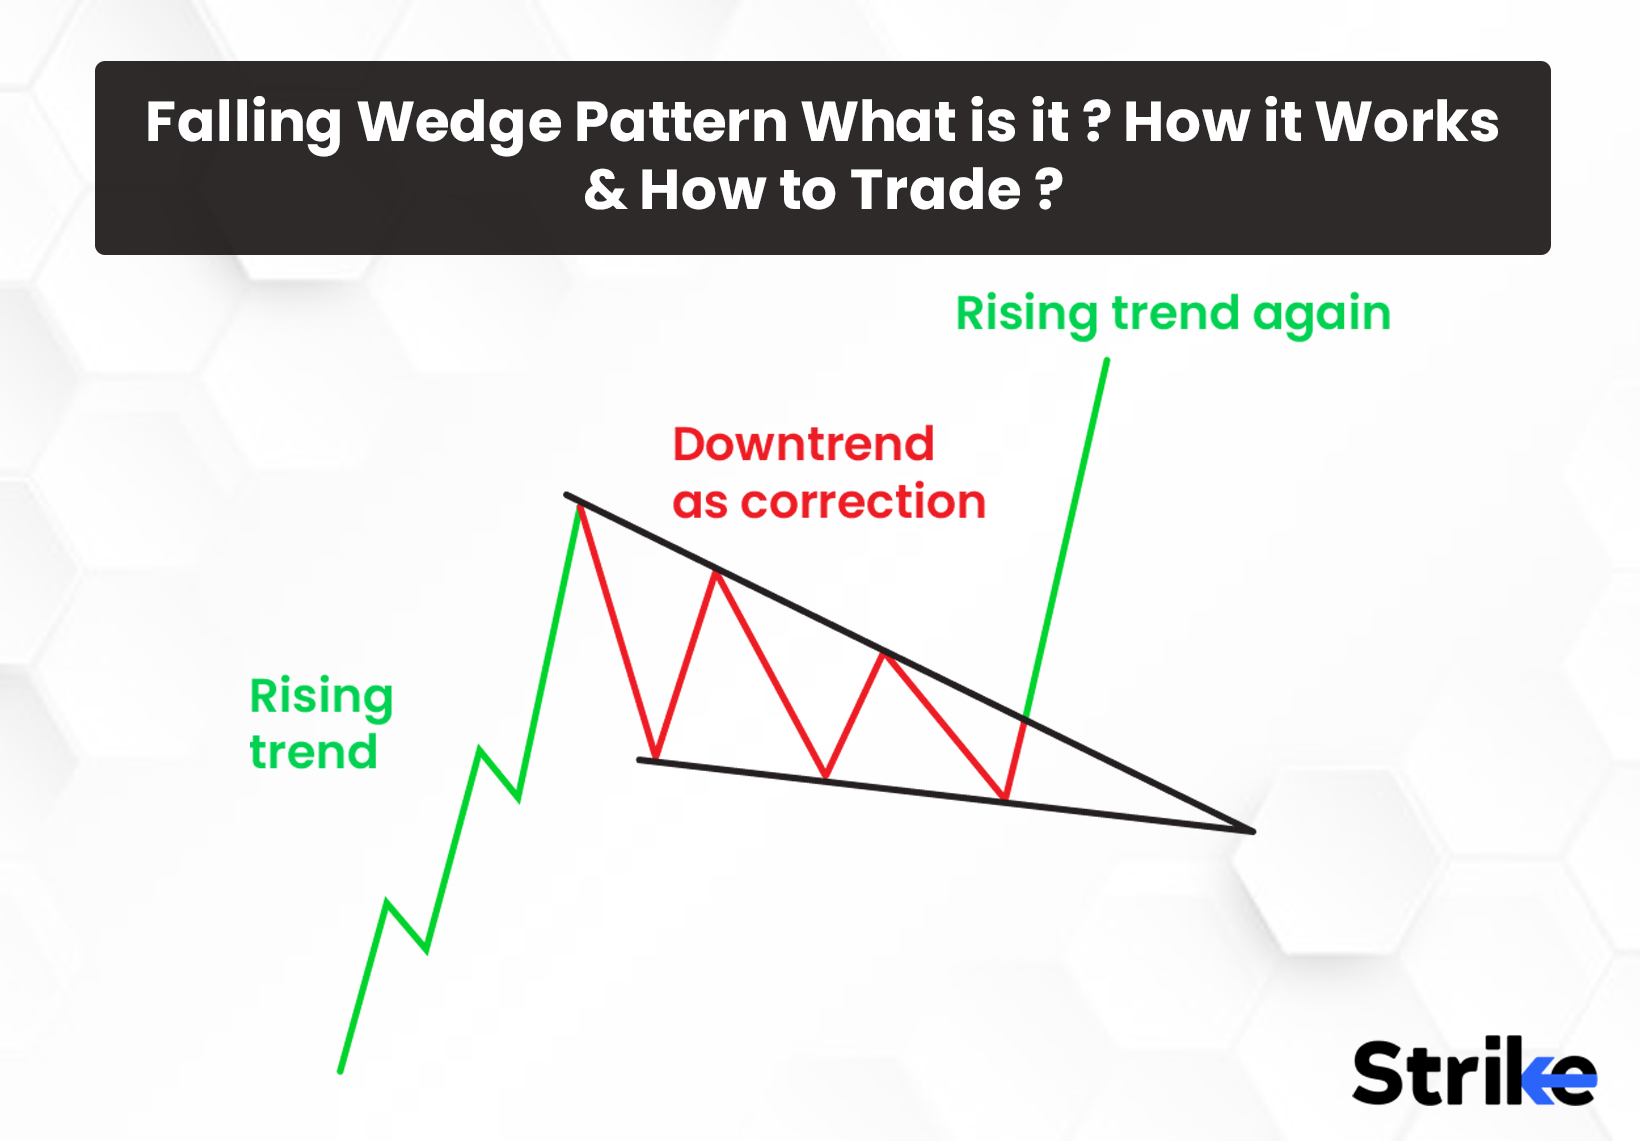 Falling Wedge Pattern: What is it? How it Works? and How to Trade?